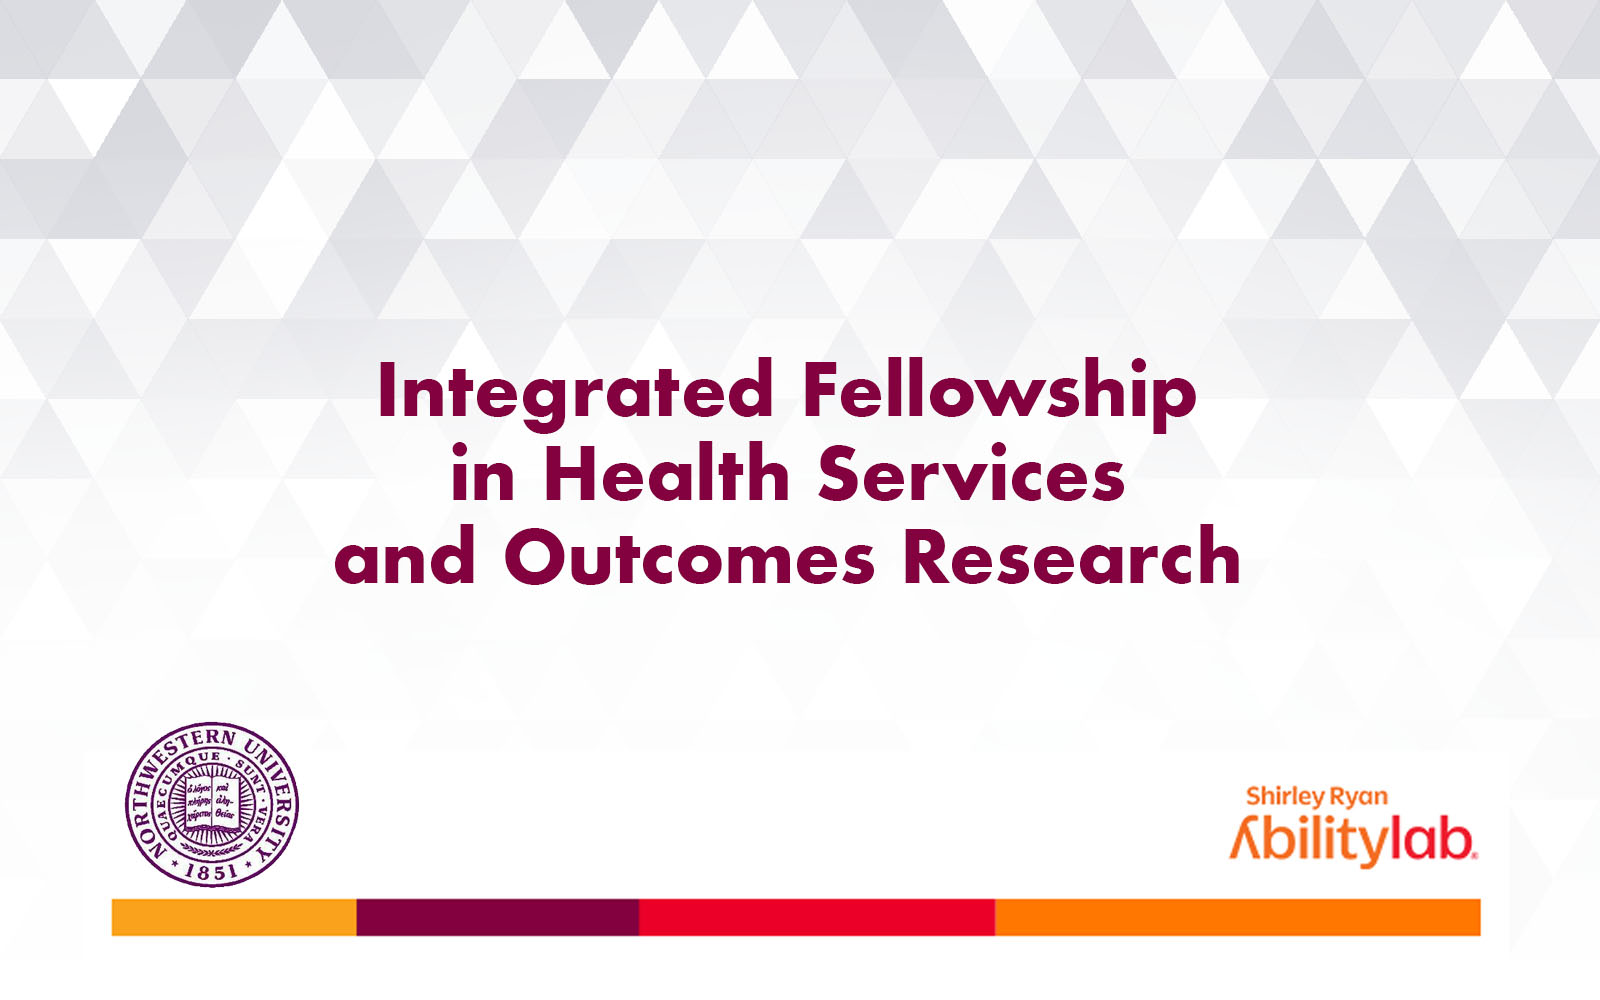 Integrated Fellowship in Health Services and Outcomes Research